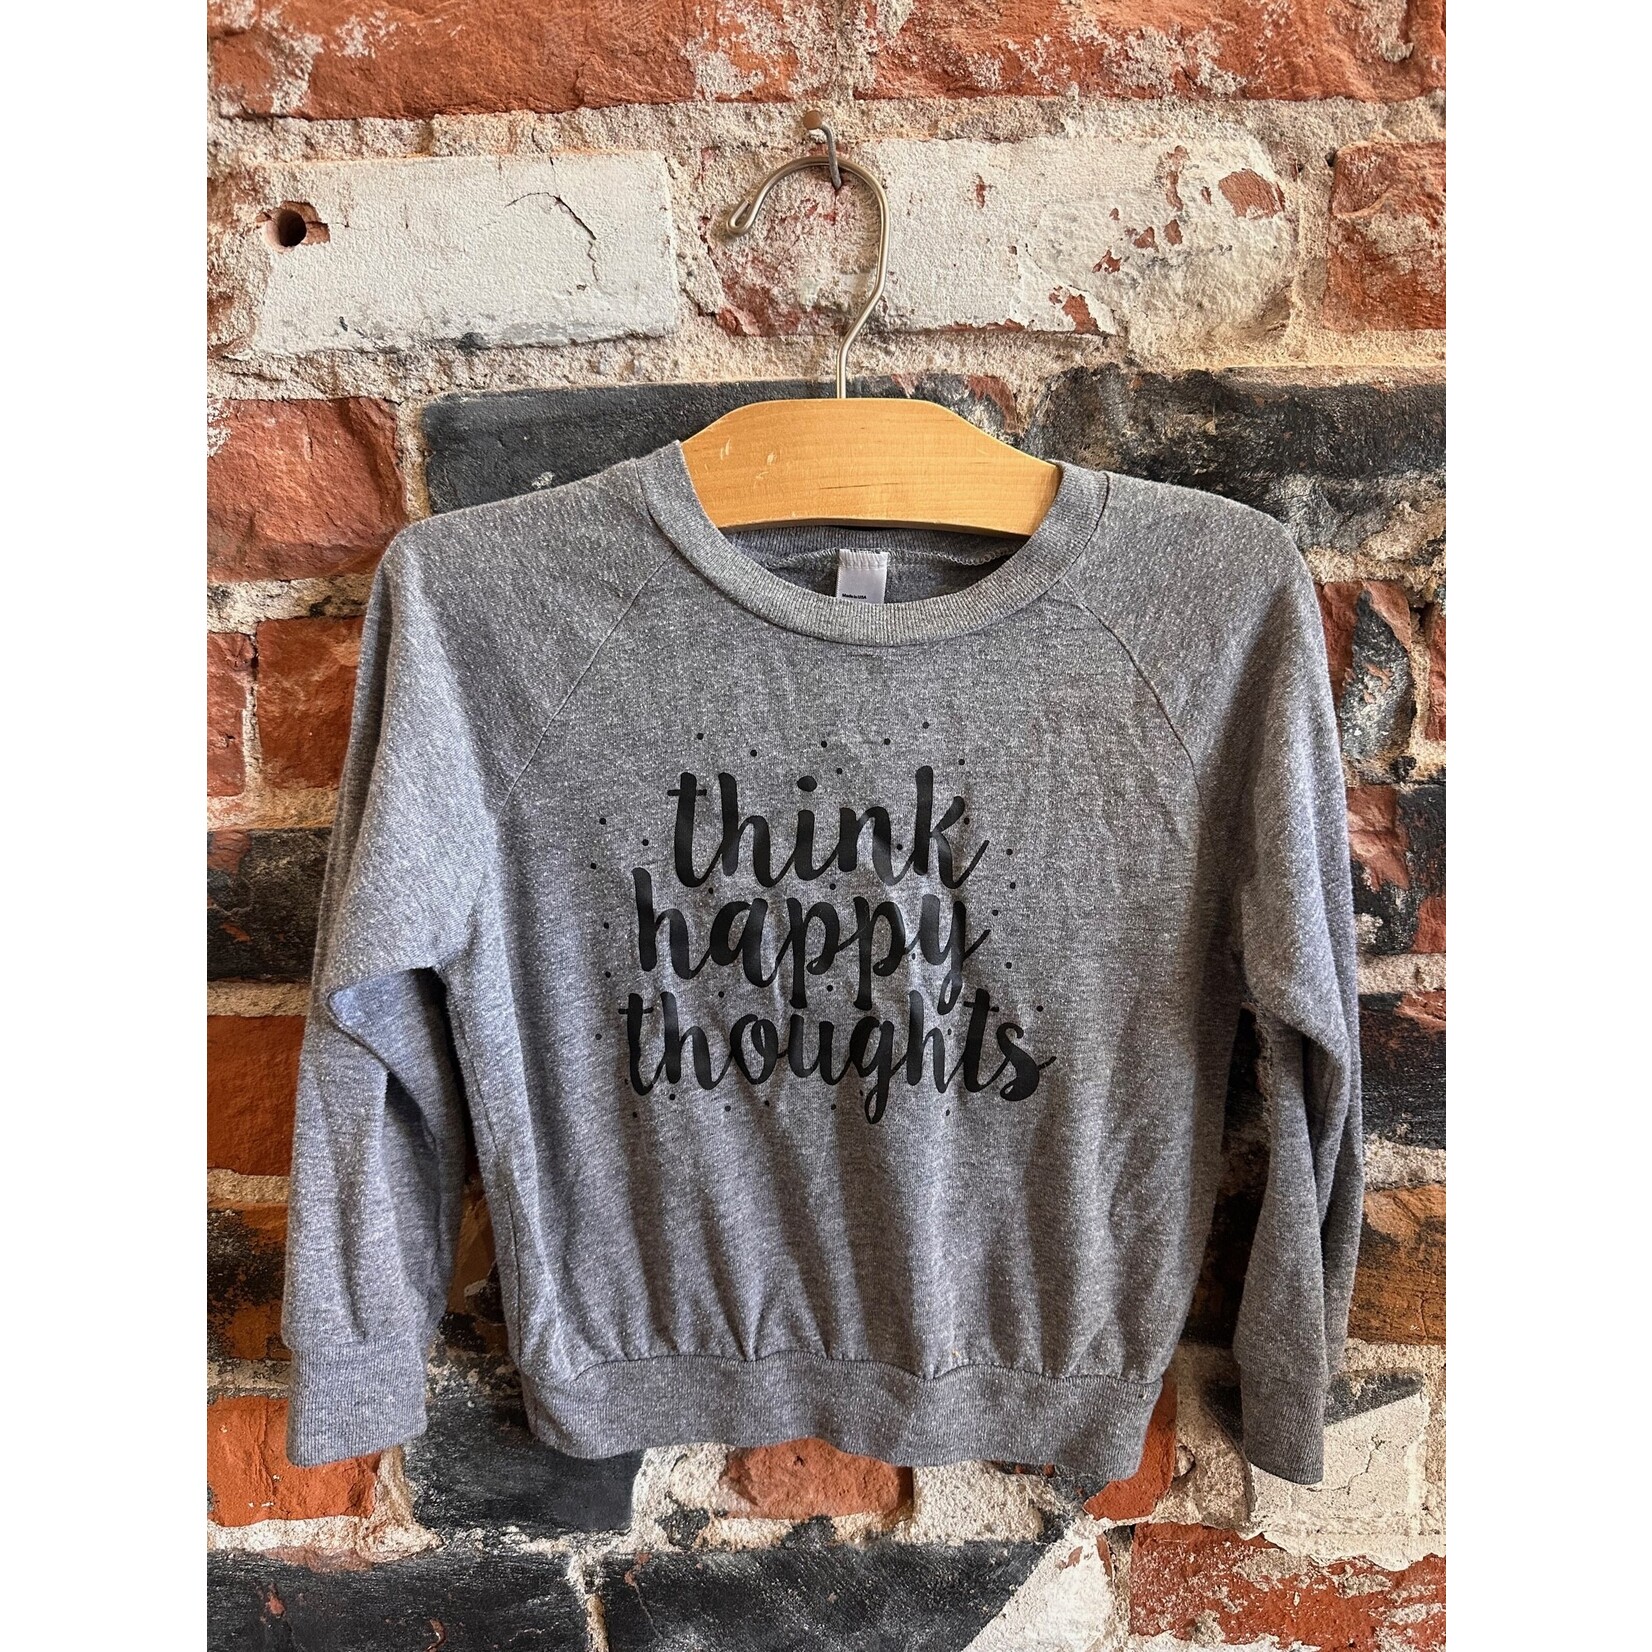 whistle & flute whistle & flute happy thoughts sweatshirt - 2 yr